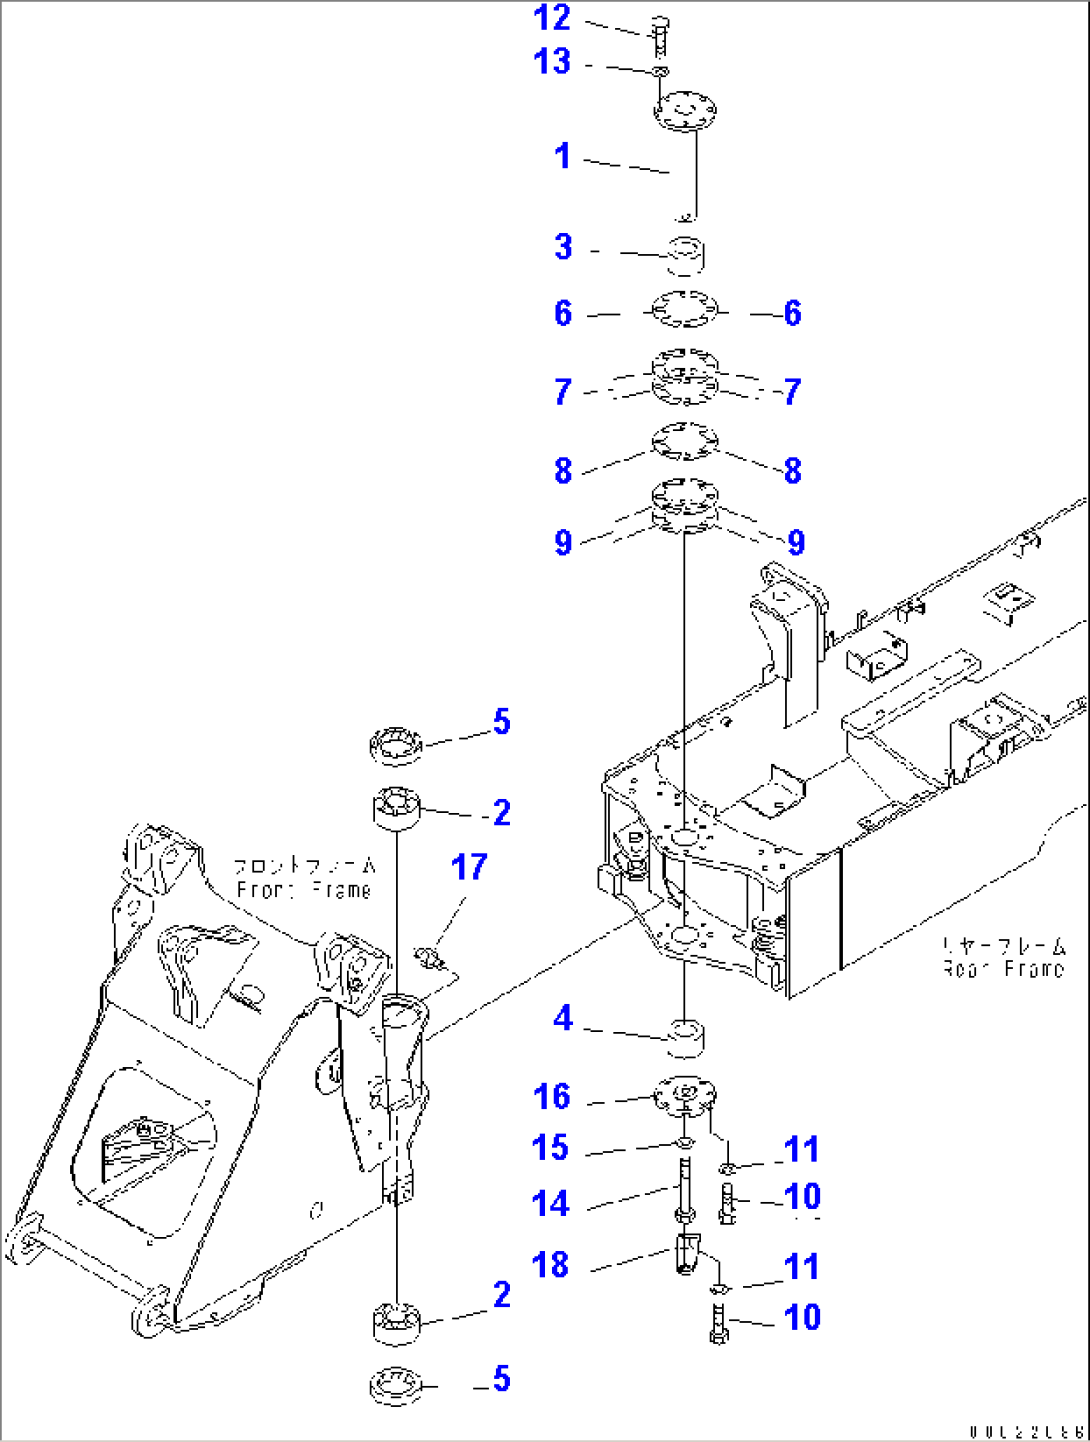 HINGE PIN (FOR FRONT AND REAR FRAME CONNECTING)(#11196-)